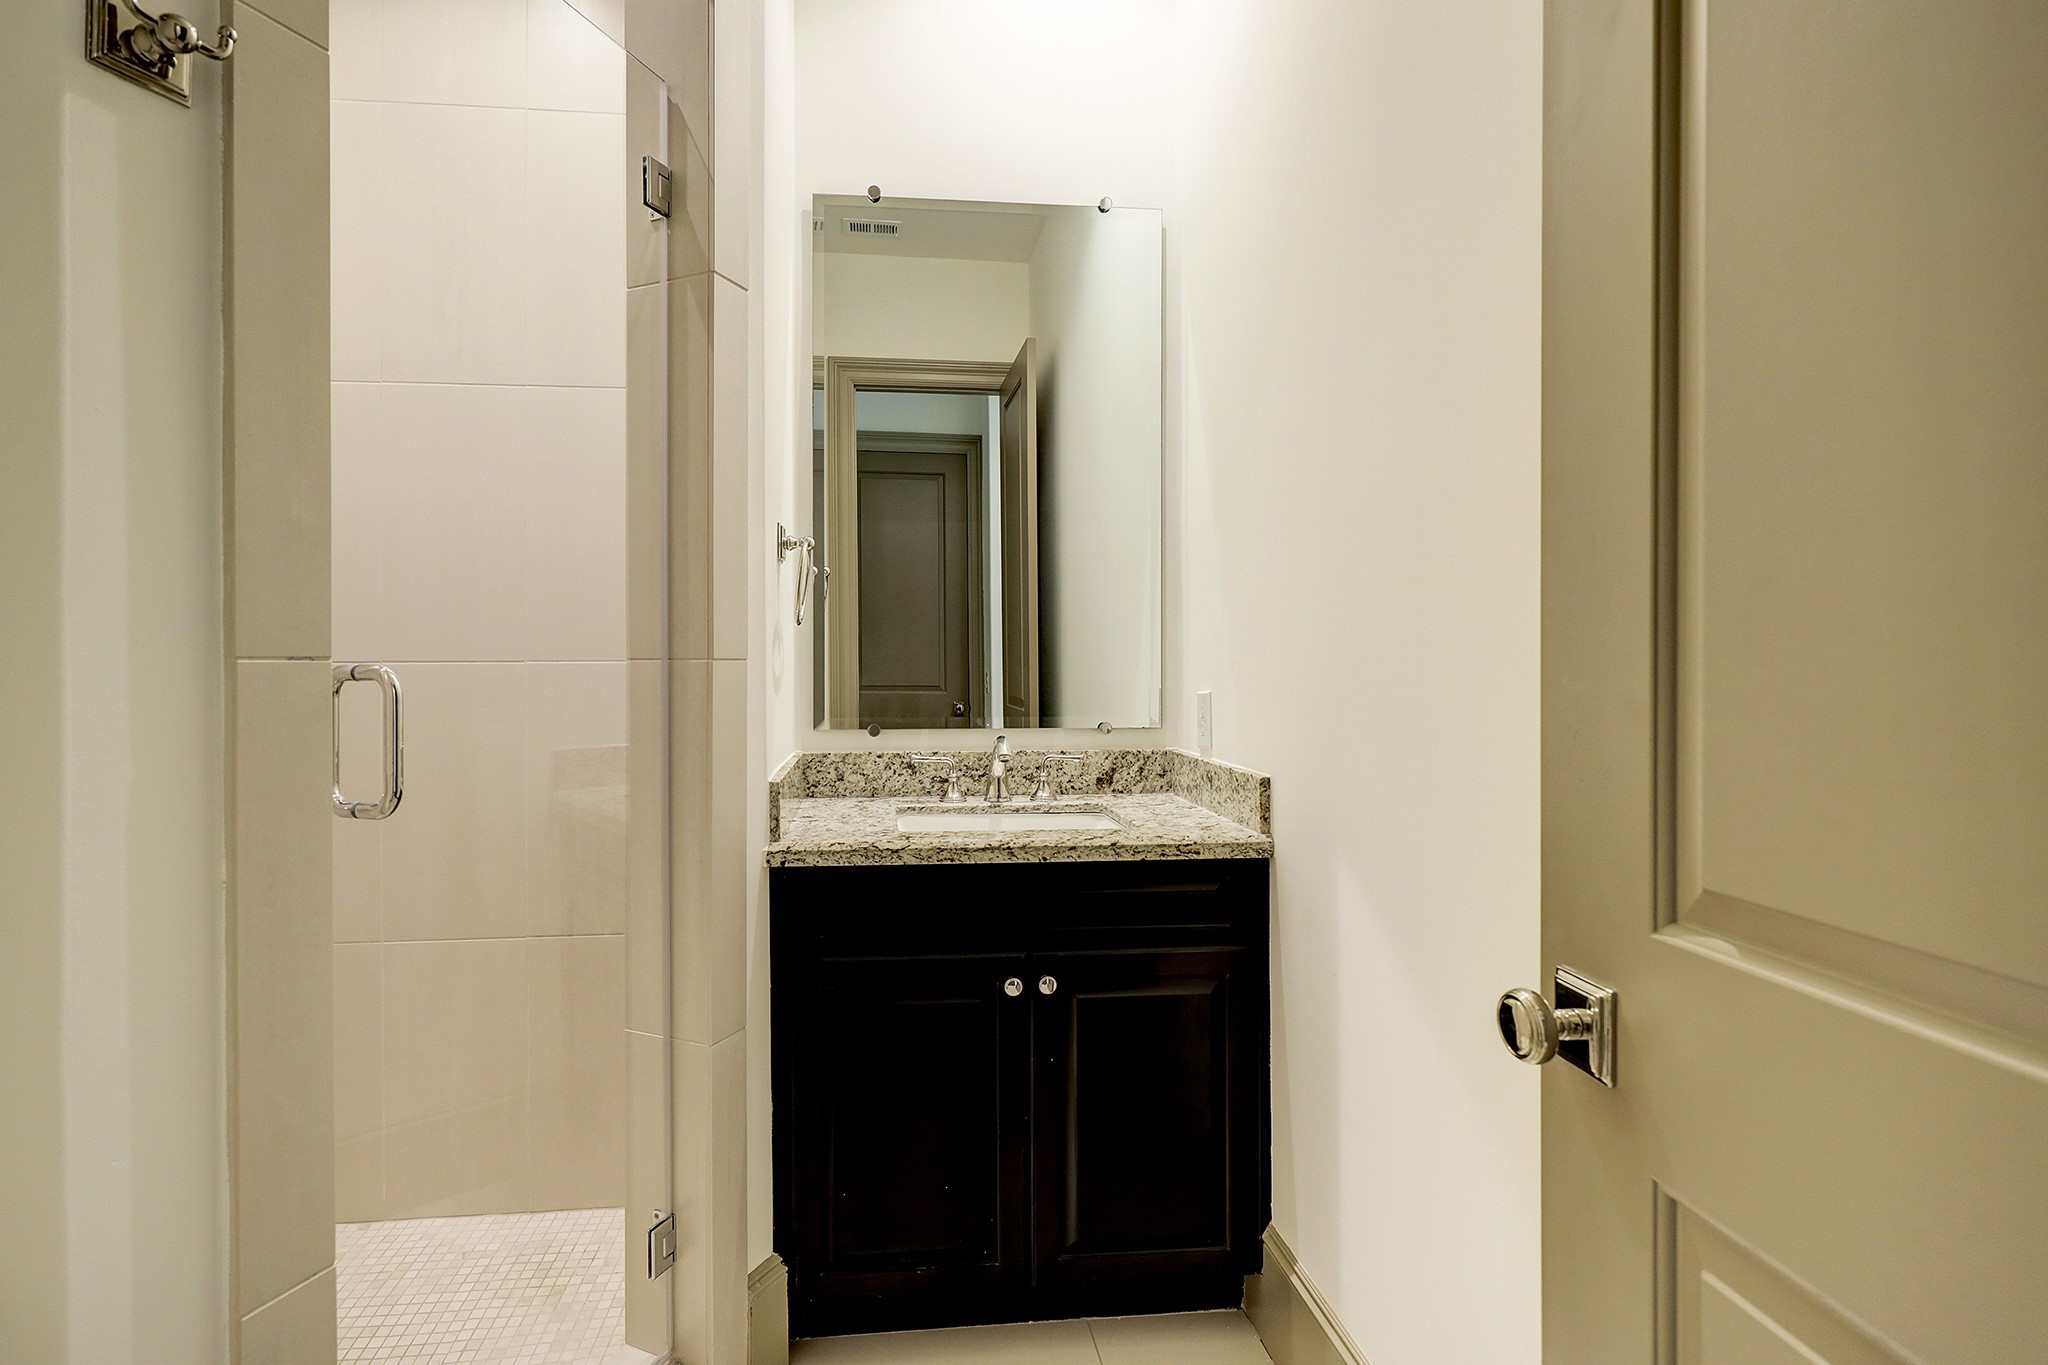 ENSUITE BATHROOM FOR SECOND BEDROOM AND ALSO OPENS TO HALLWAY FOR GUEST USING THE CITY ROOM